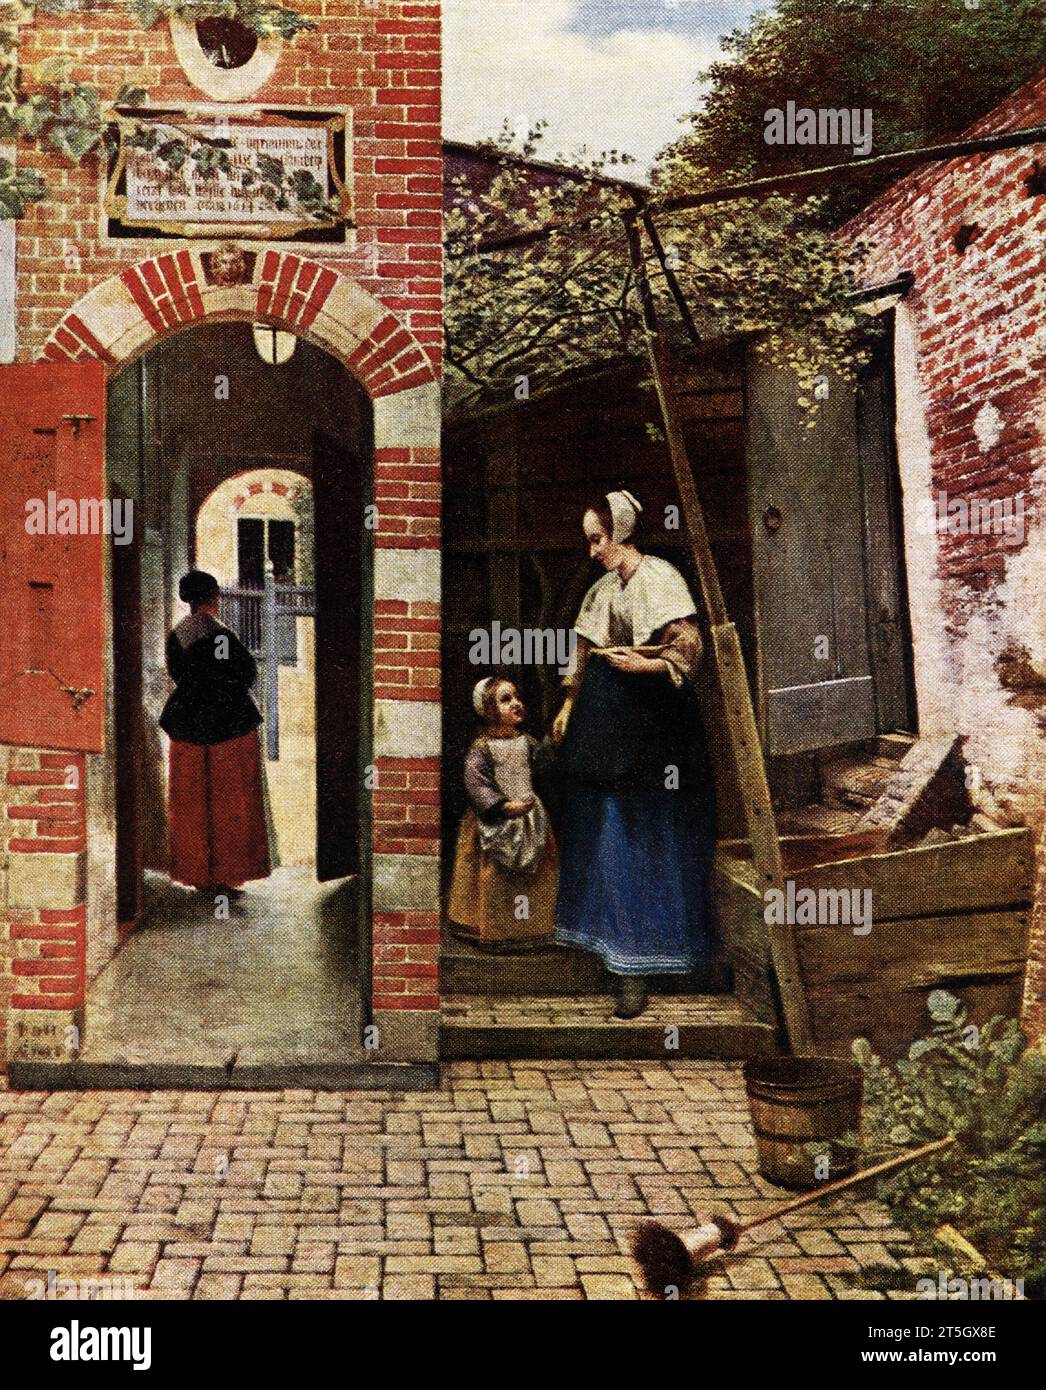 The 1916 caption reads: “Pieter de Hooch 1629-1677. Dutch School  - Court of a Dutch House paved with Bricks in National Gallery. Signed P D H A 1658 - on a stone built into the base of the porch. Painted in oil on canvas. 2 ft 5 in h. x 1 ft 11.5 in w.” Pieter de Hooch was a Dutch Golden Age painter famous for his genre works of quiet domestic scenes with an open doorway. He was a contemporary, in the Delft Guild of St. Luke, of Jan Vermeer with whom his work shares themes and style. Stock Photo